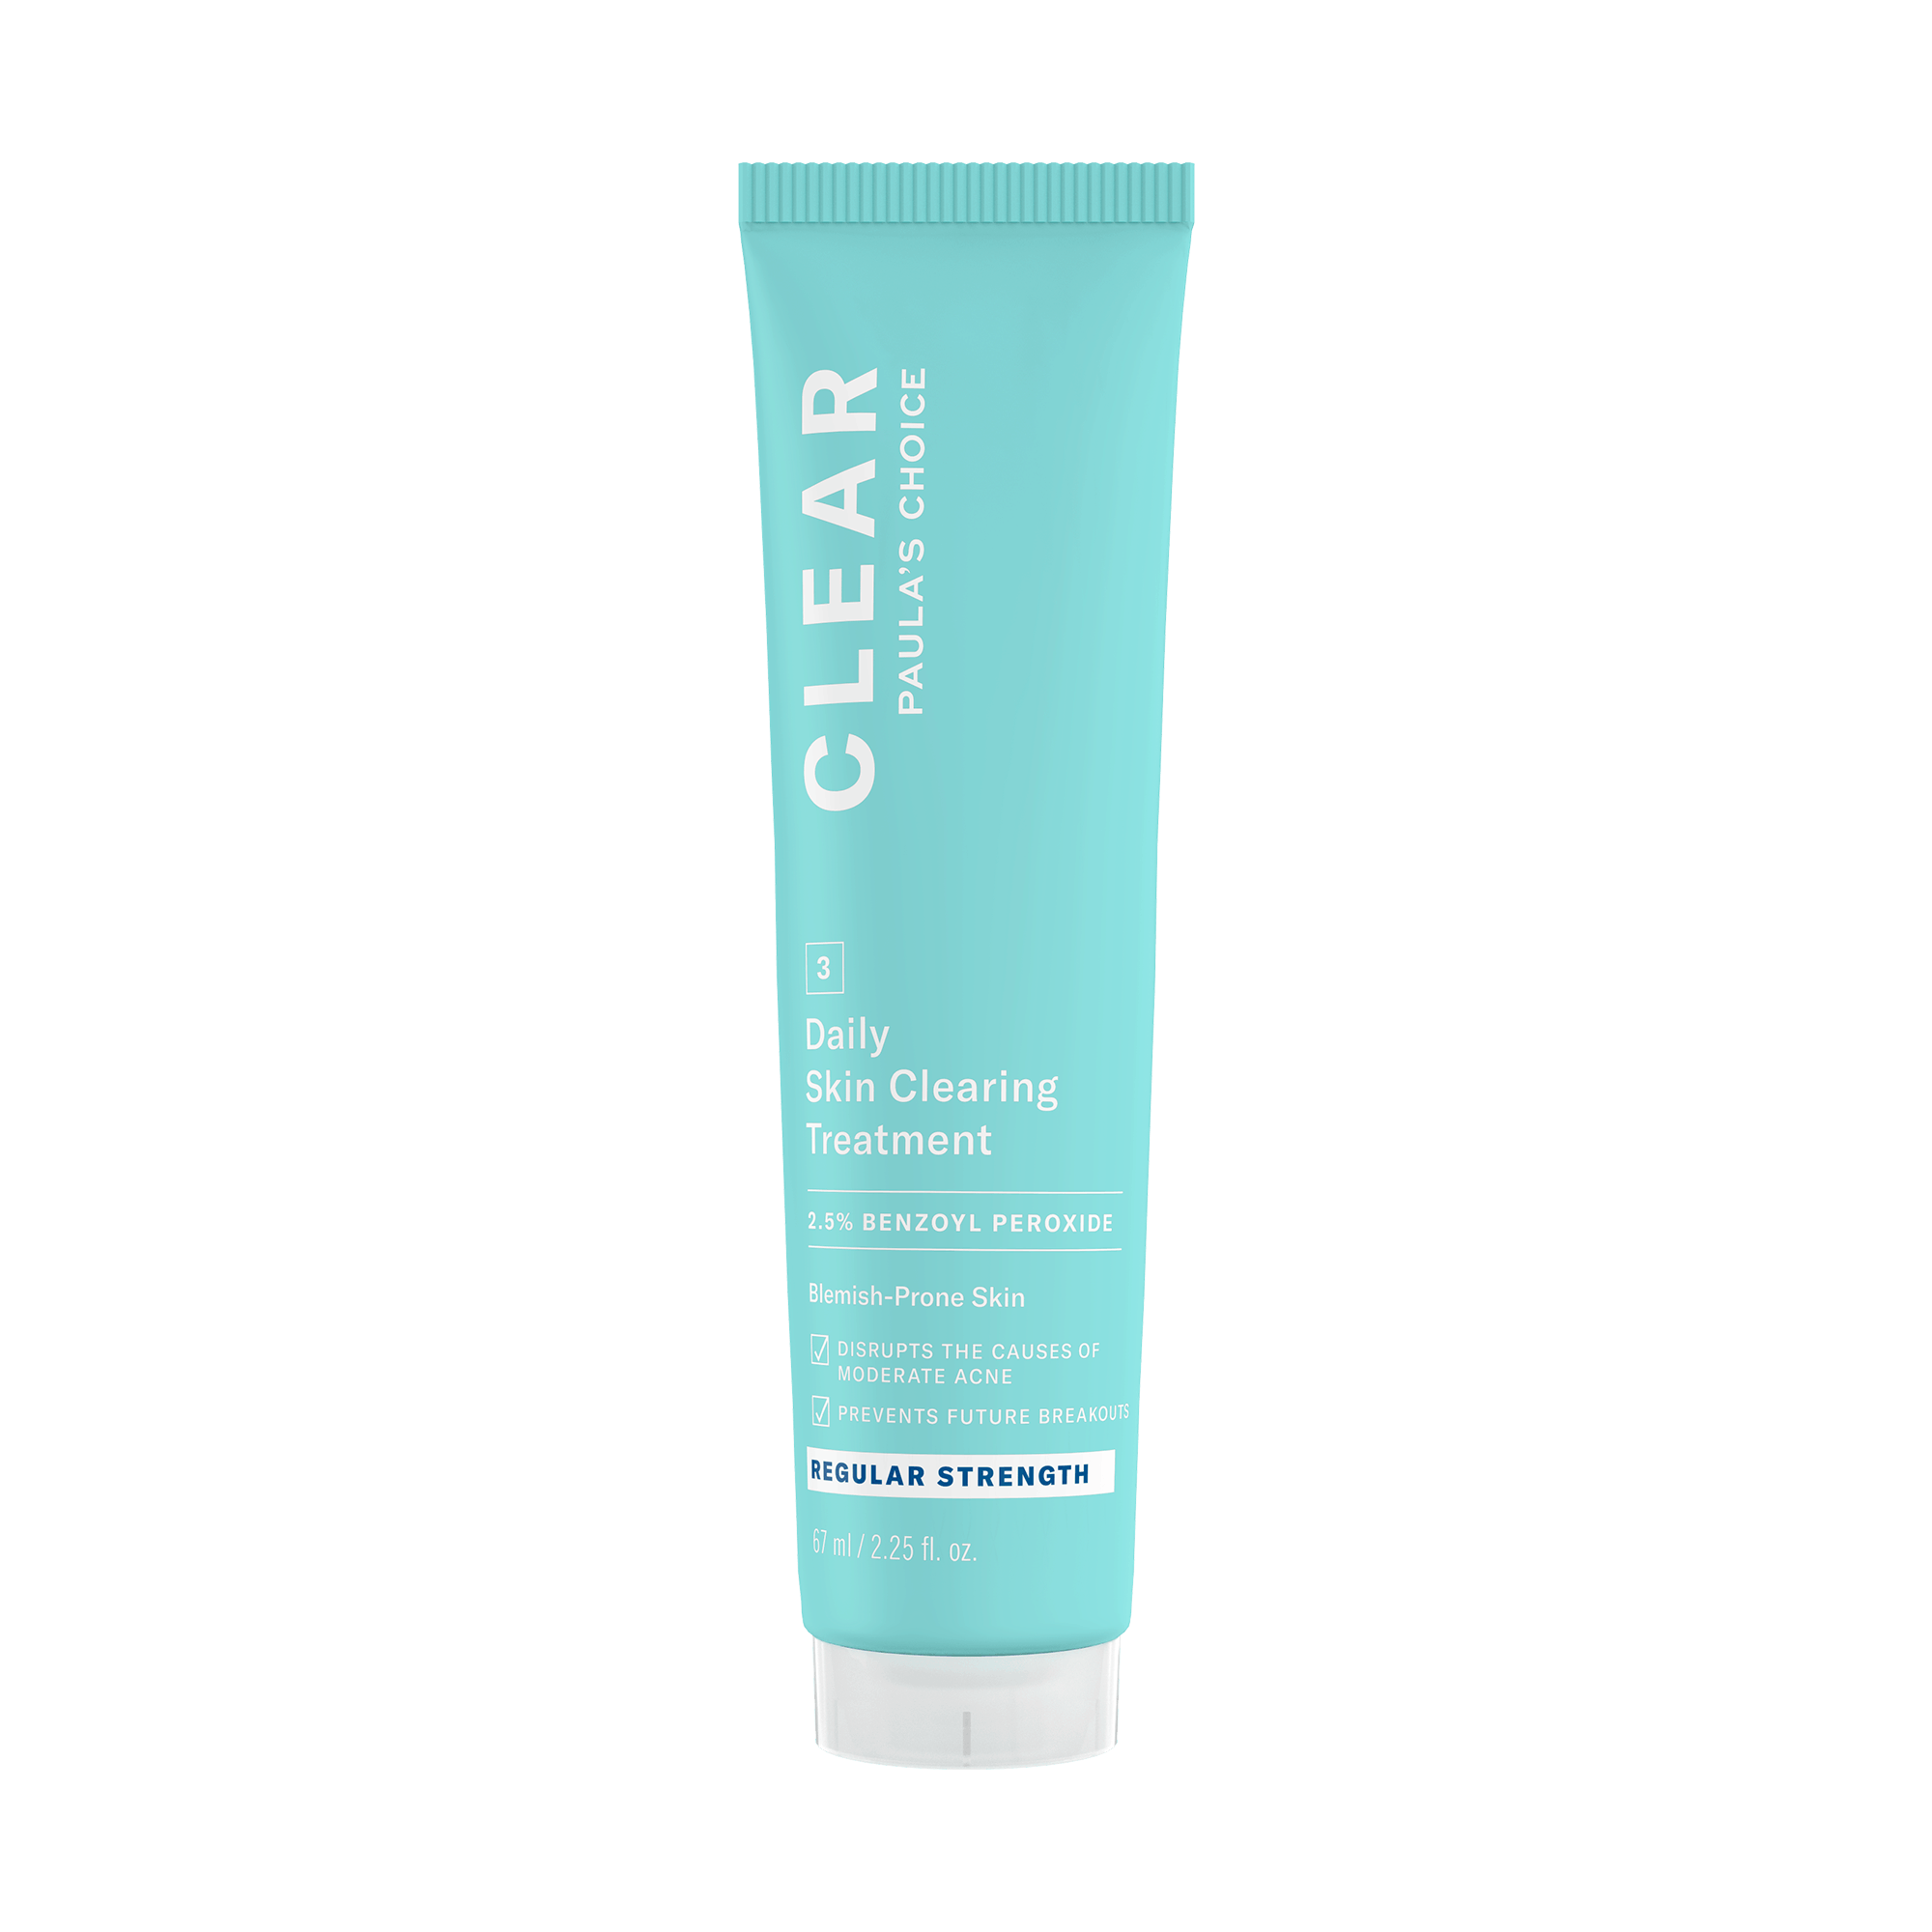 Paula’s Choice Clear Regular Strength Daily Skin Clearing Treatment with 2.5% Benzoyl Peroxide